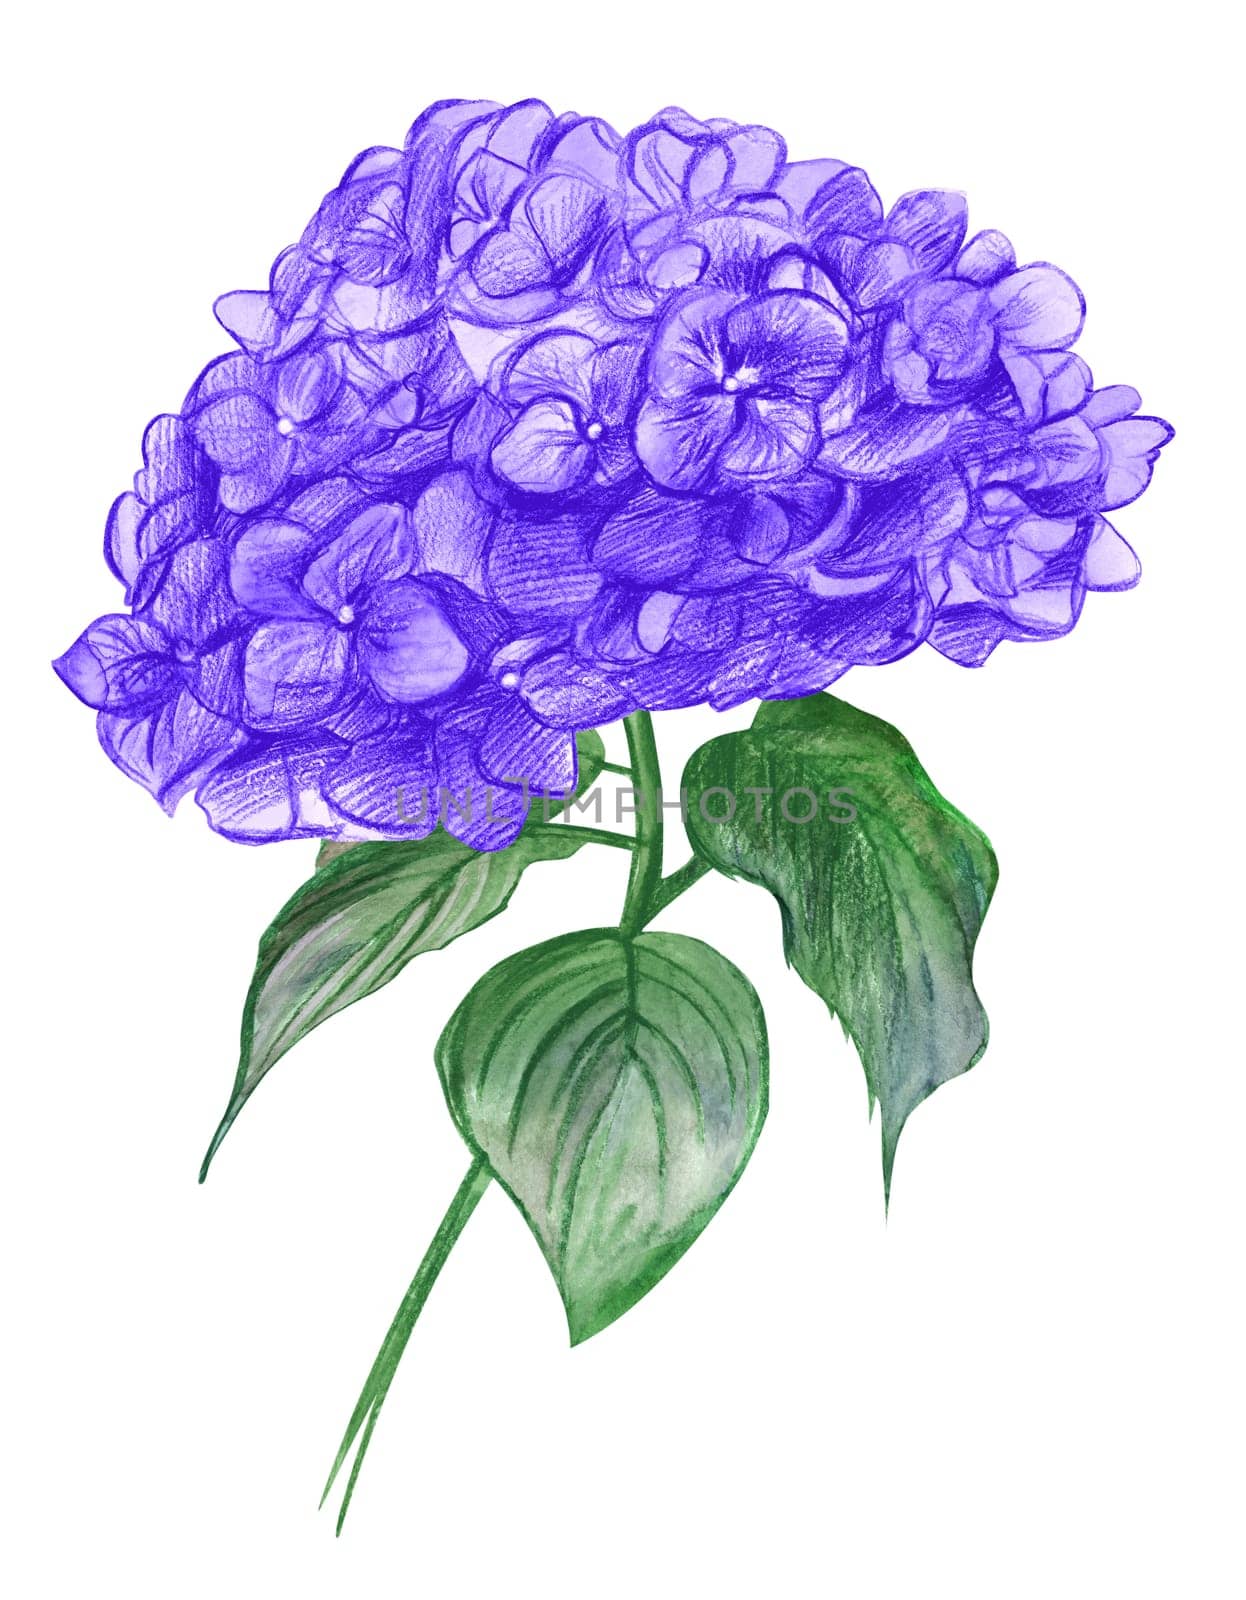 Bouquet with Hydrangea Flower in purple hues painted in watercolor for cards and print design isolated on white background